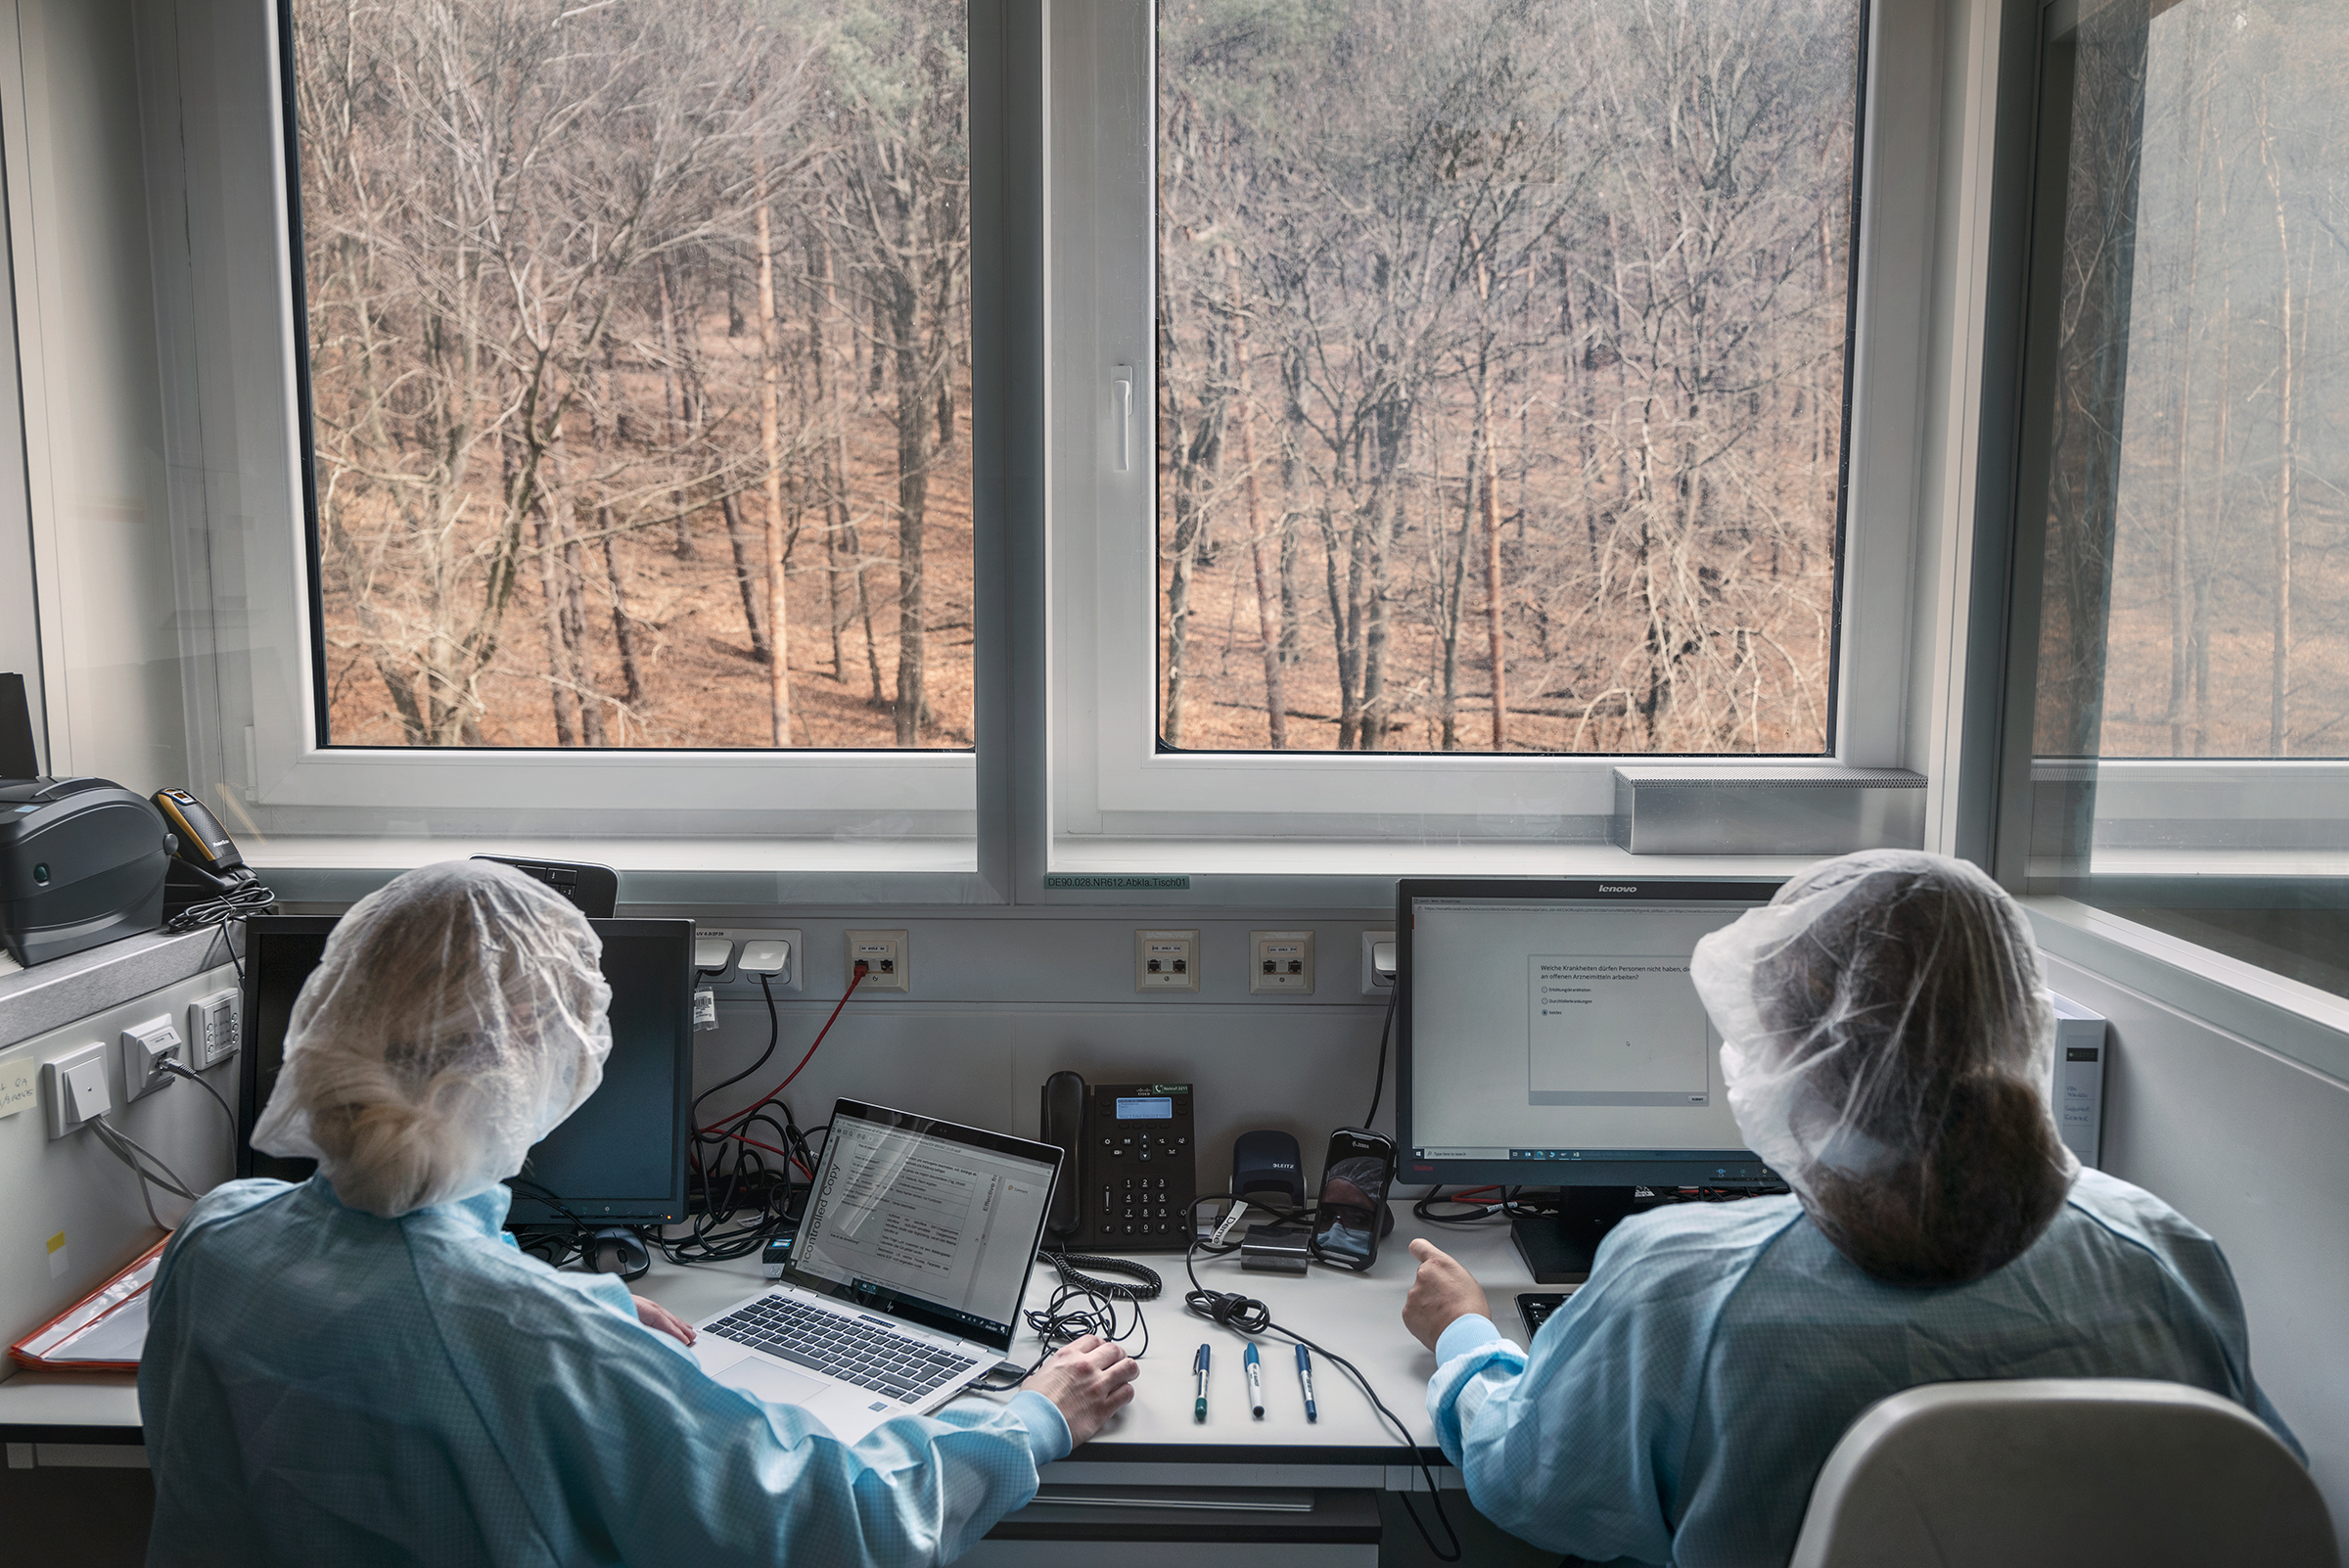 The new BioNTech production facility is in a wooded valley in Marburg. Technicians working in one of the prep labs often spot deer roaming in the nearby forest. (Luca Locatelli for TIME)